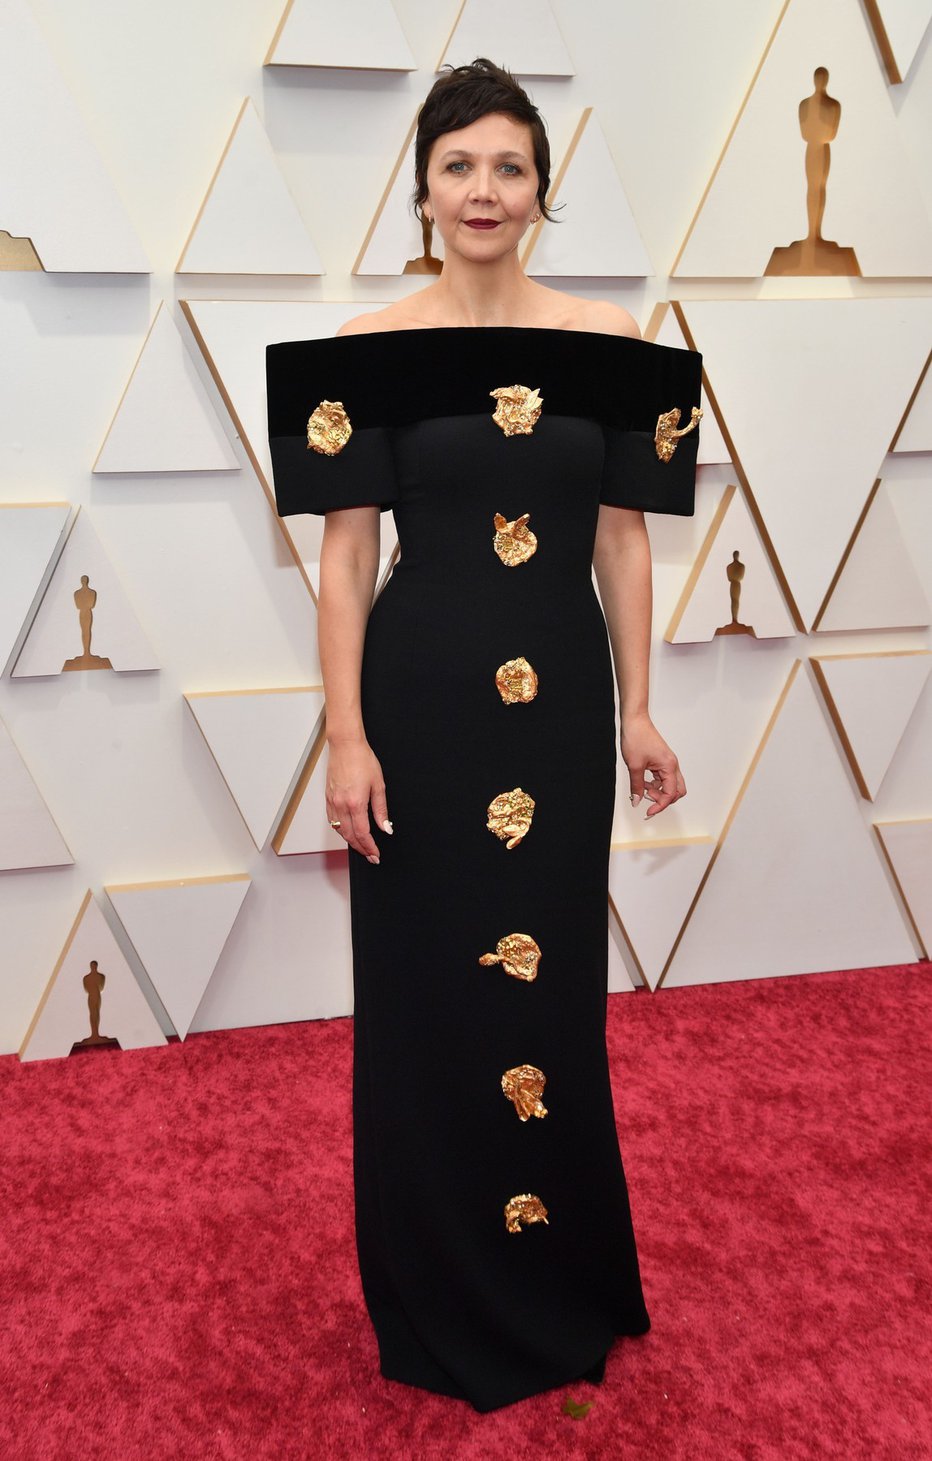 Fotografija: Maggie Gyllenhaal
94th Annual Academy Awards, Arrivals, Los Angeles, USA - 27 Mar 2022,Image: 673477902, License: Rights-managed, Restrictions:, Model Release: no, Credit line: Profimedia
